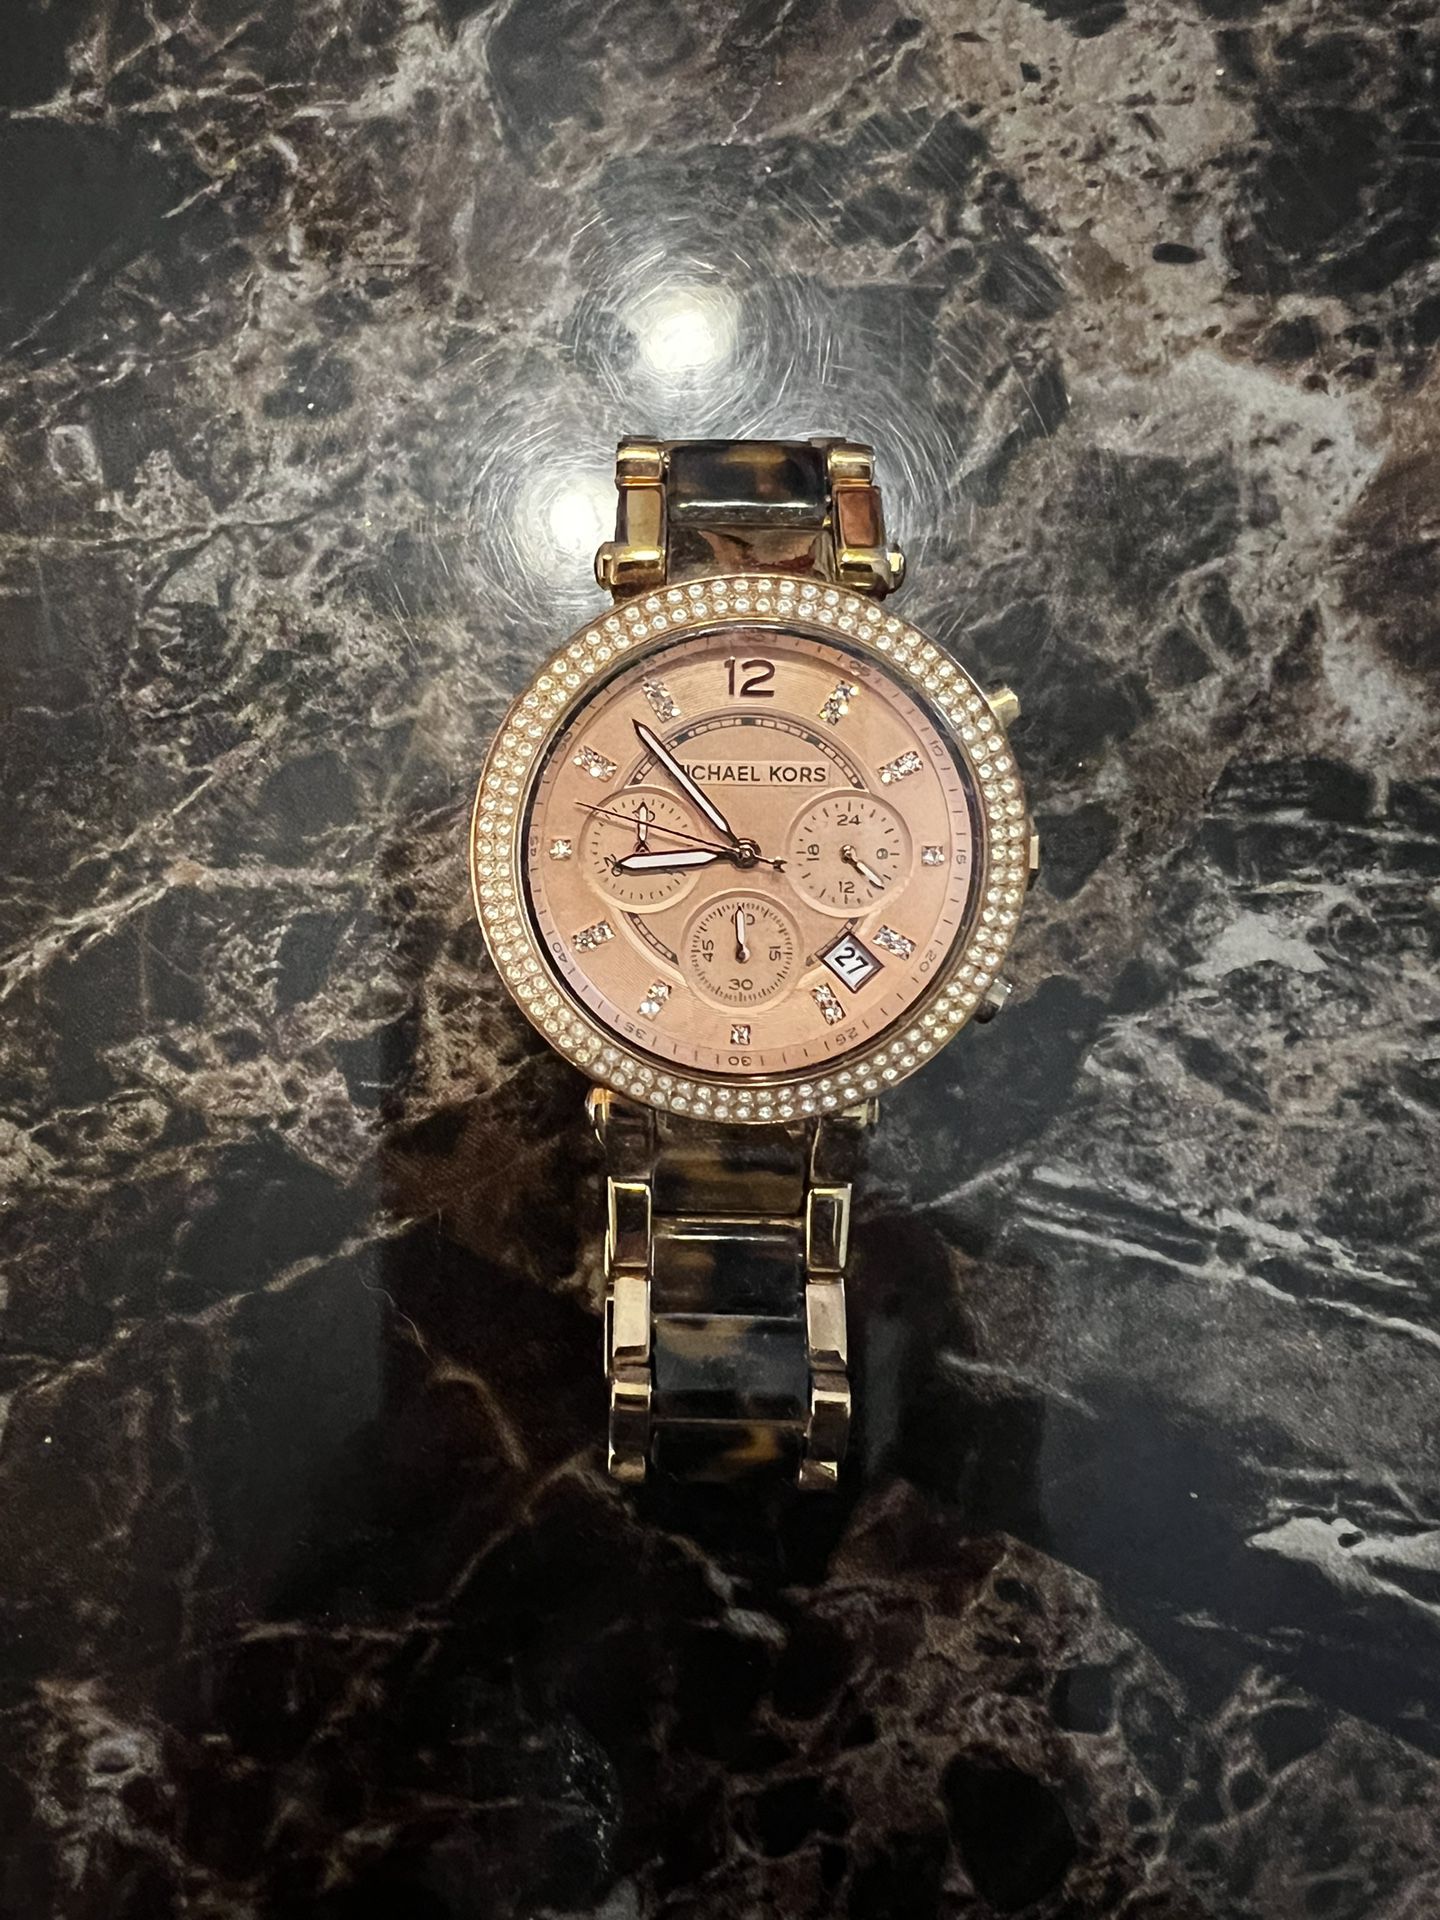 Michael Kors Ladies Tortoise Shell Watch with Rosegold and Bling